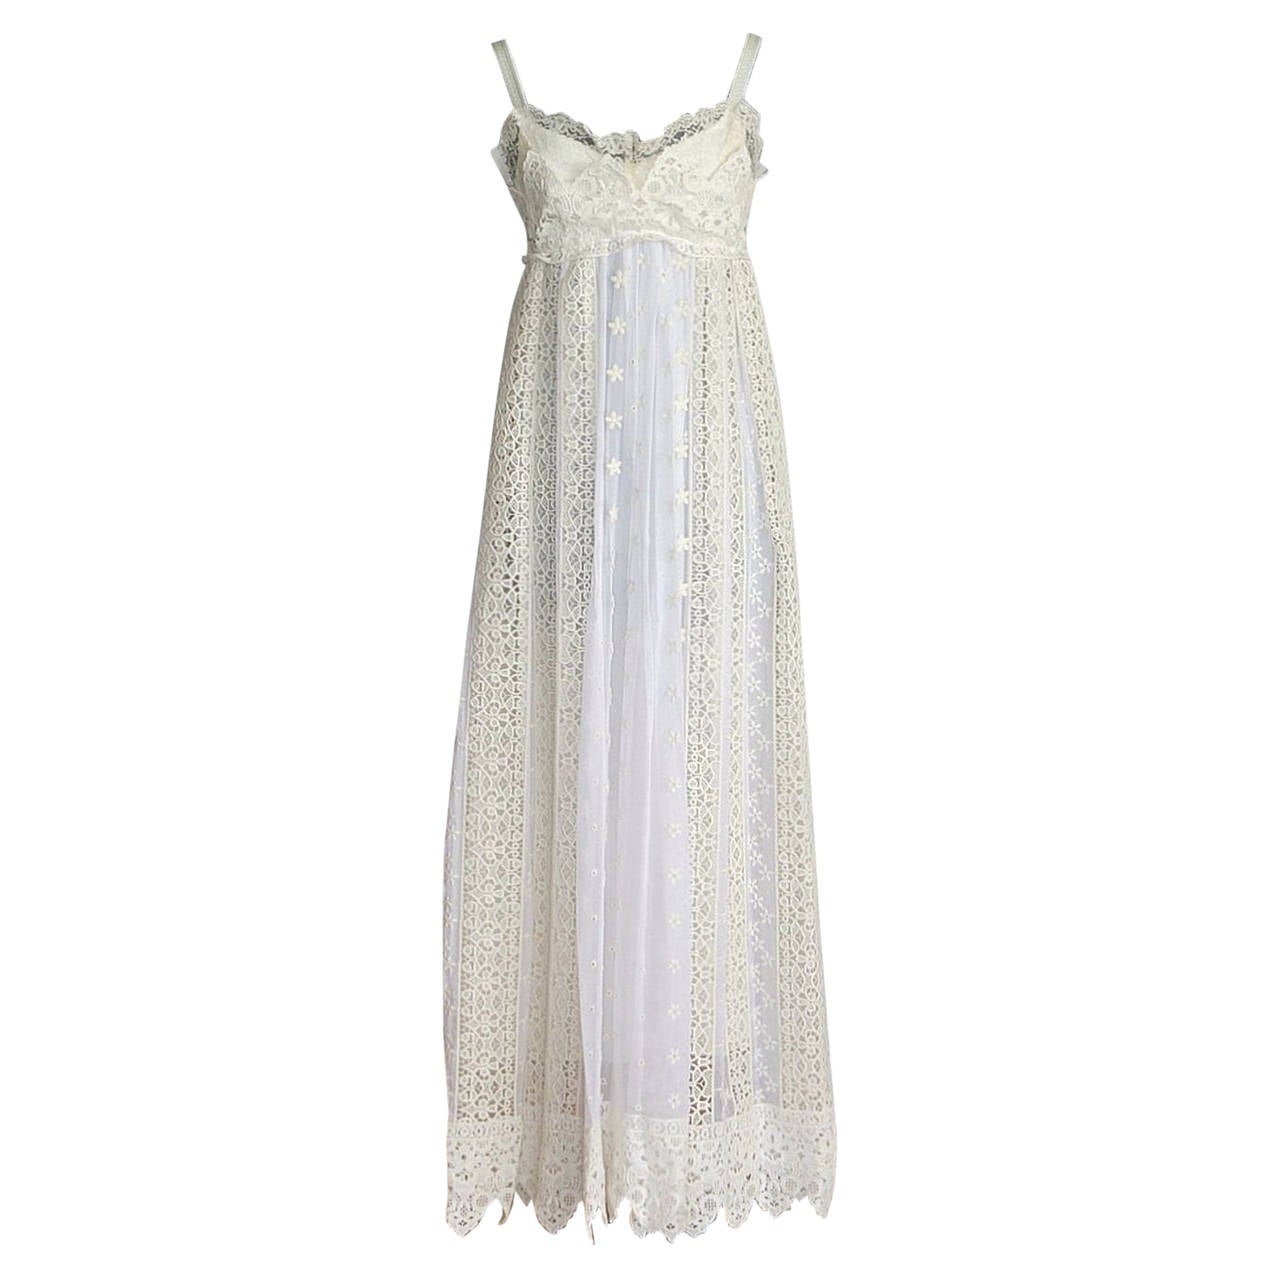 DOLCE&GABBANA dress empire lace and embroidery ethereal  38 4